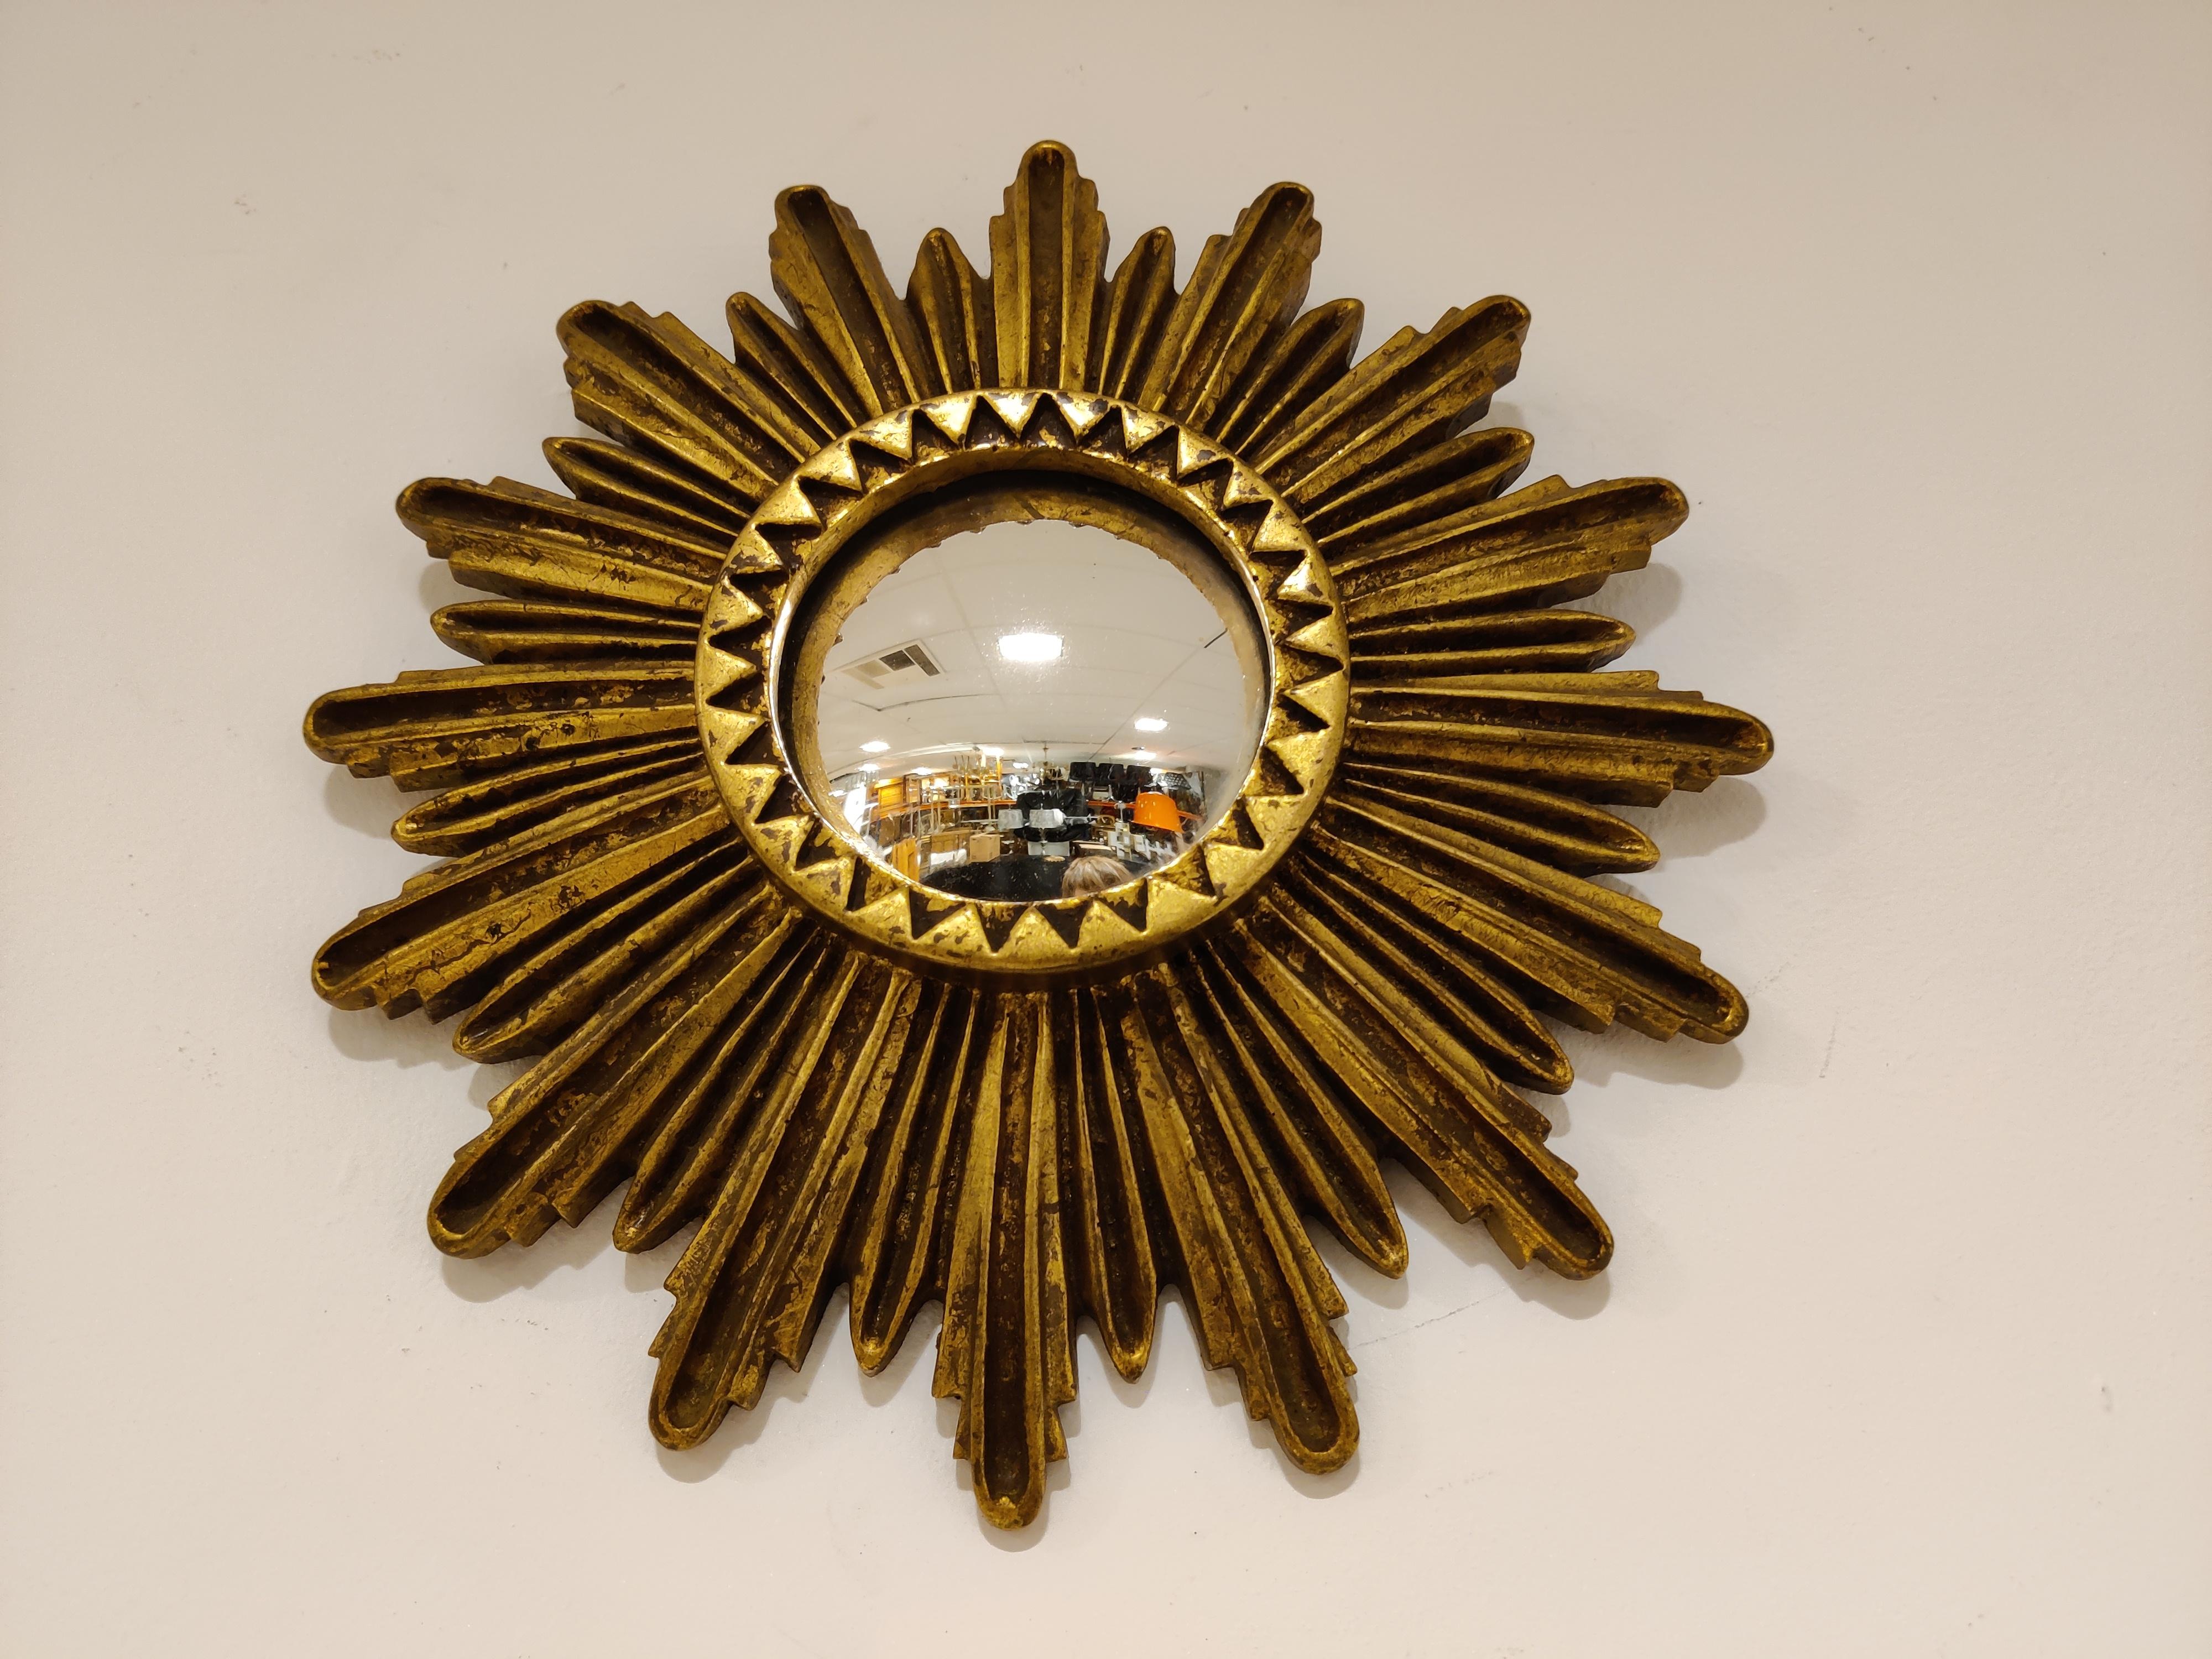 Small gilded resin sunburst mirror with convex mirror glass.

The golden mirror is in a very good condition.

This is a small example which is much harder to find.

1960s - Belgium

Pristine condition.

Dimensions:

Diameter: